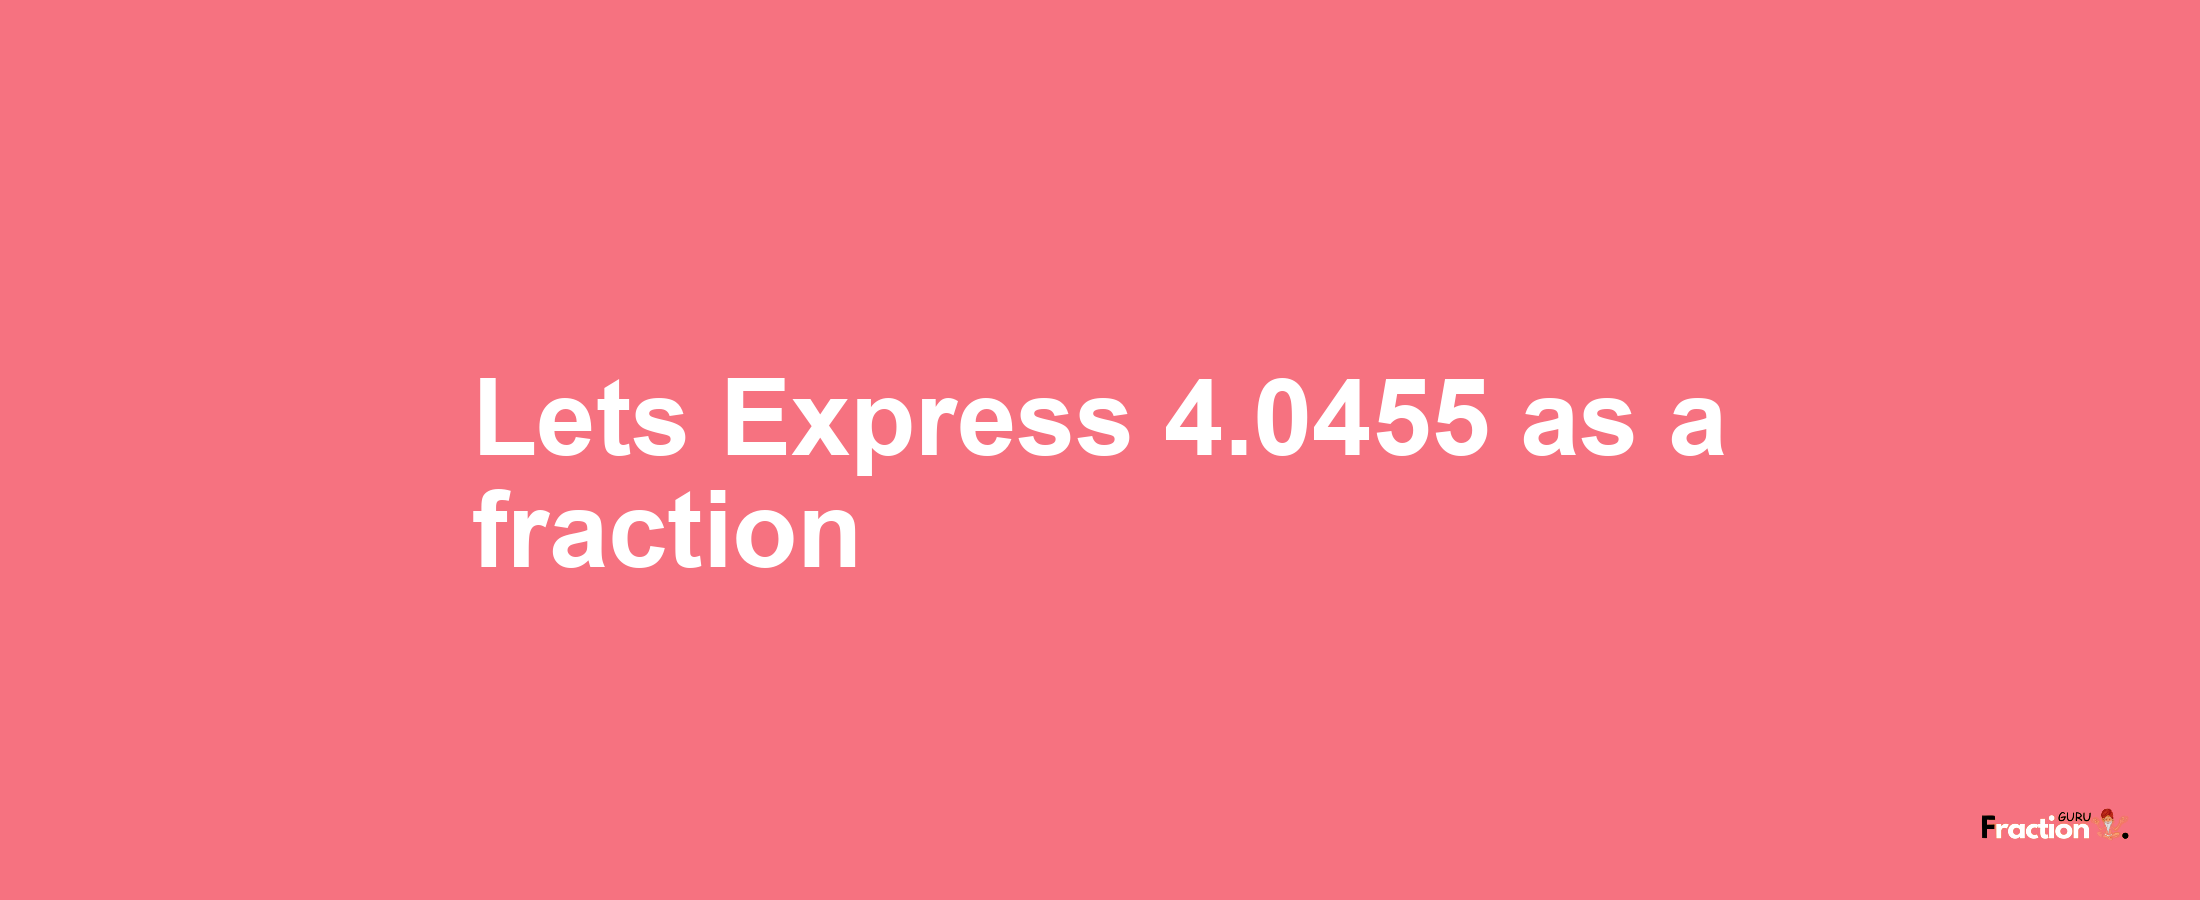 Lets Express 4.0455 as afraction